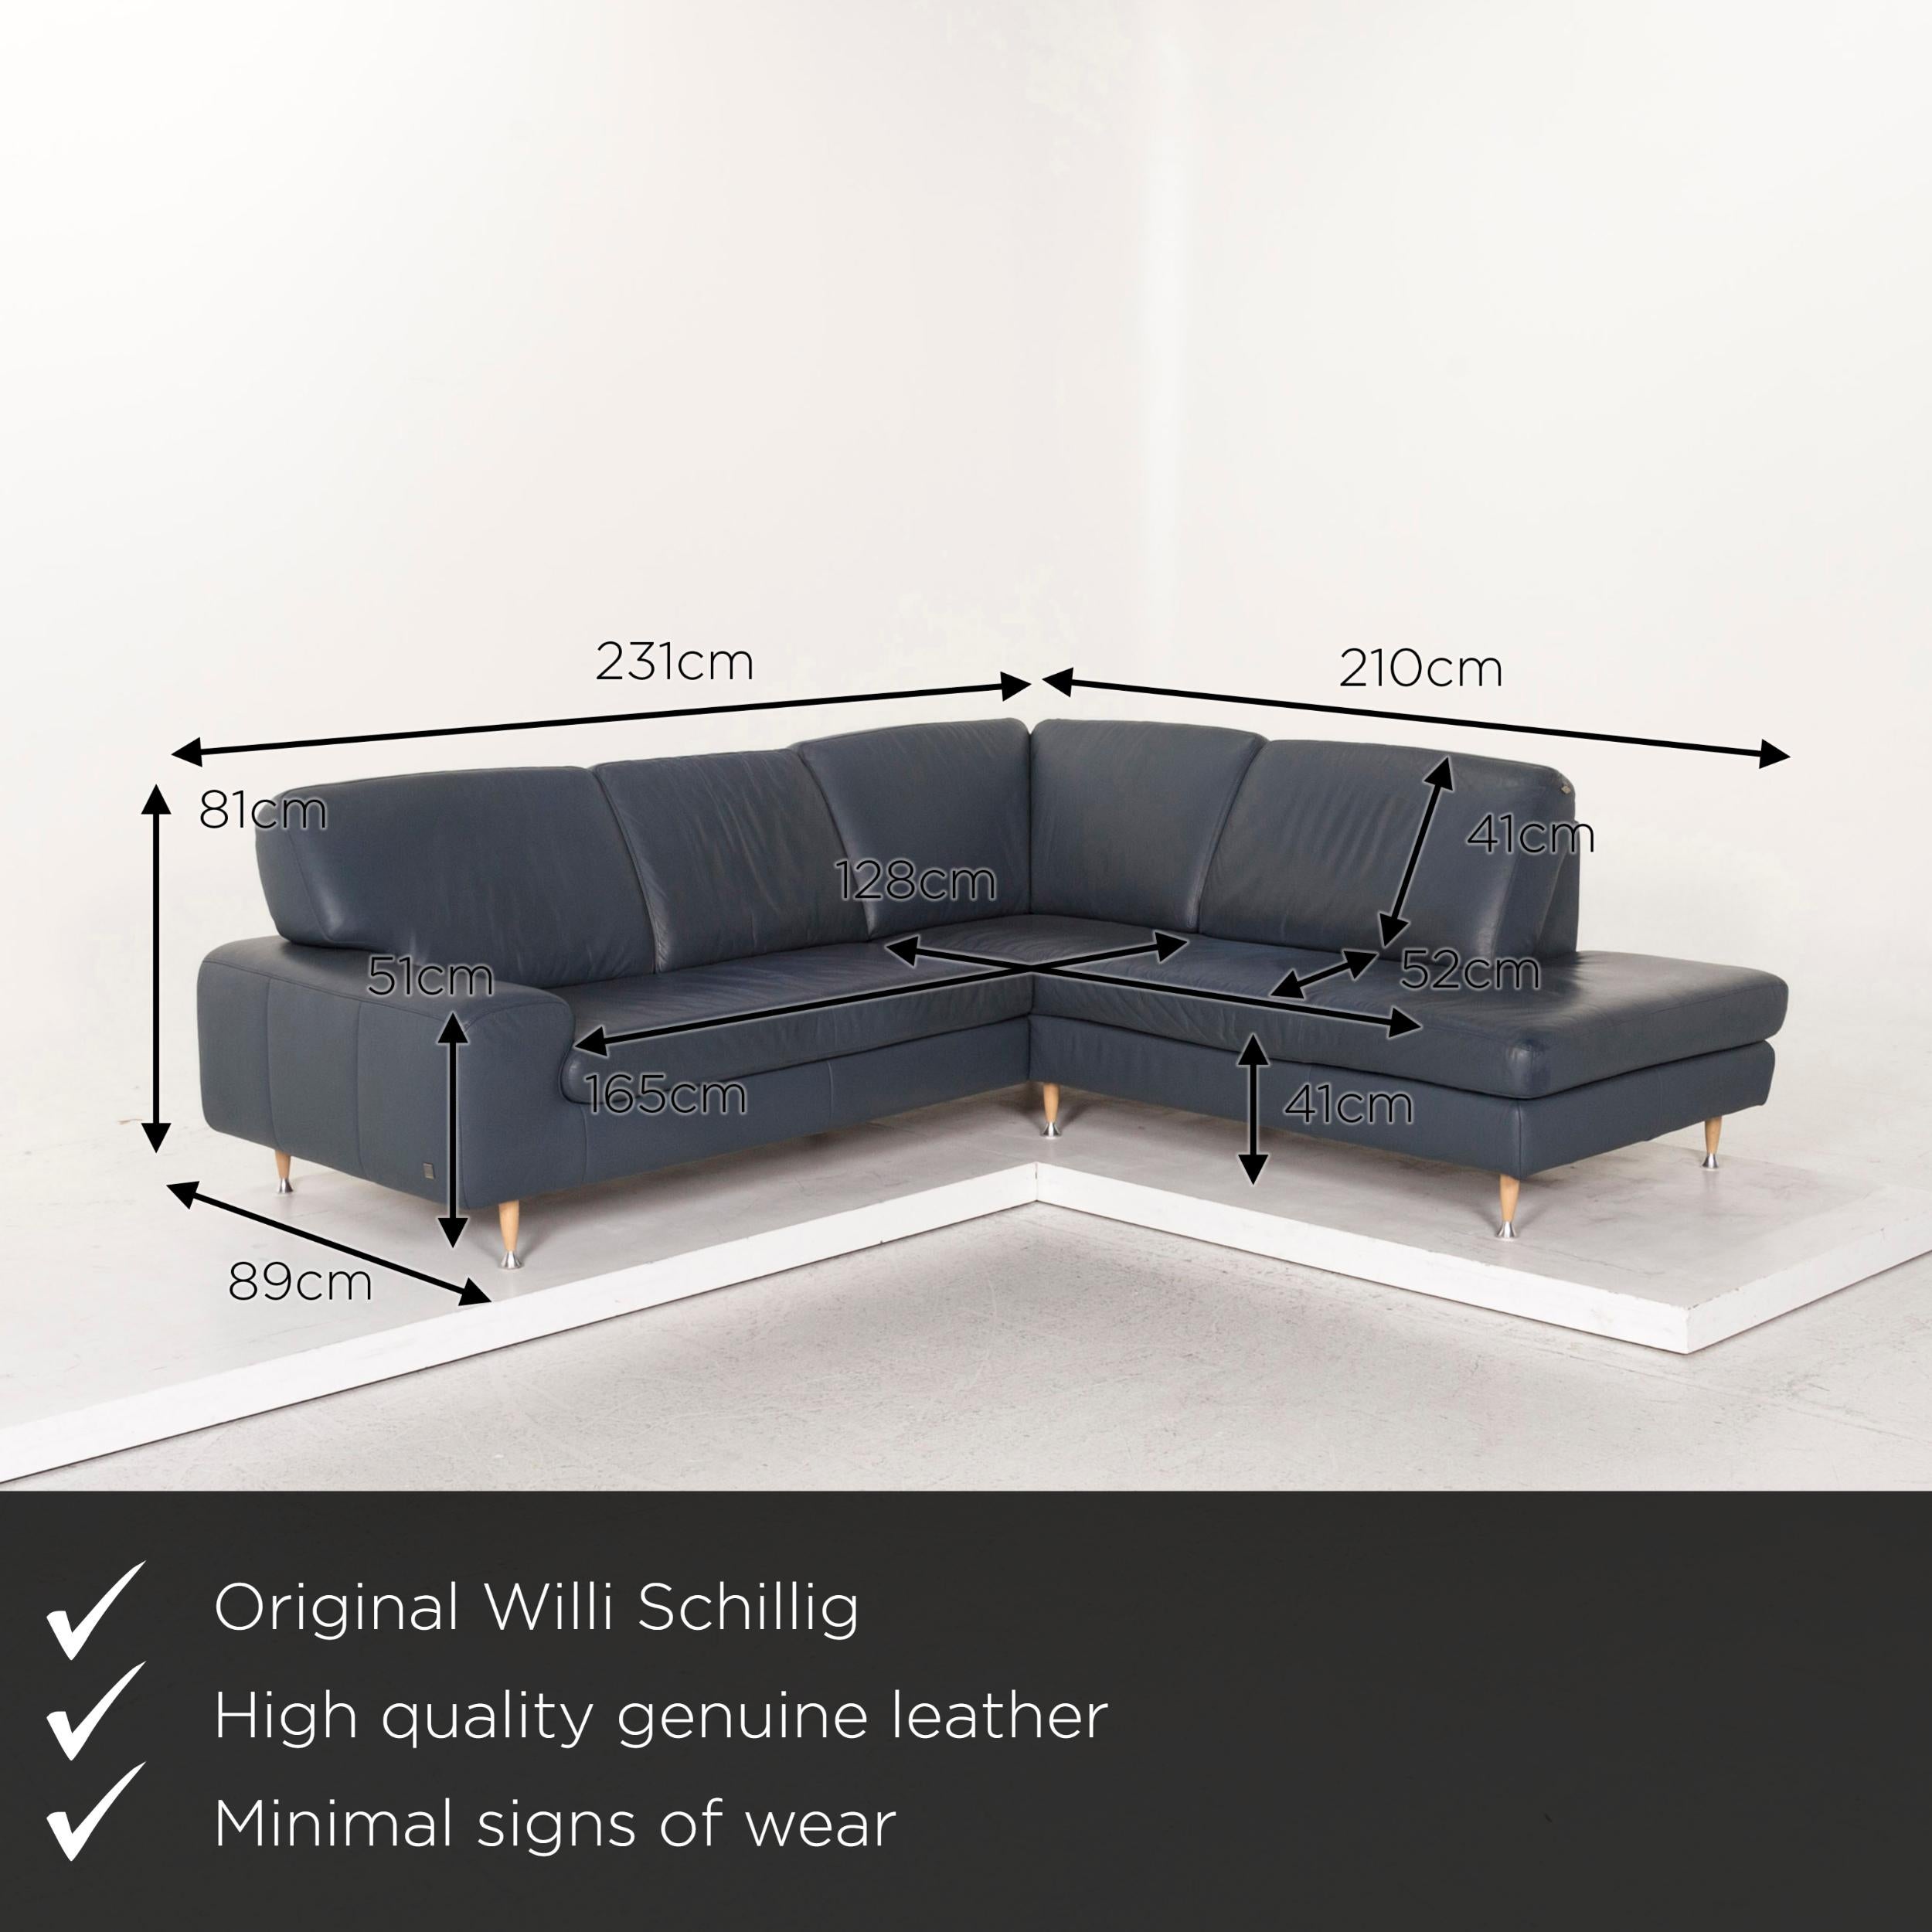 We present to you a Willi Schillig leather corner sofa blue sofa couch.

 

 Product measurements in centimeters:
 

Depth 89
Width 231
Height 81
Seat height 41
Rest height 51
Seat depth 52
Seat width 165
Back height 41.
  